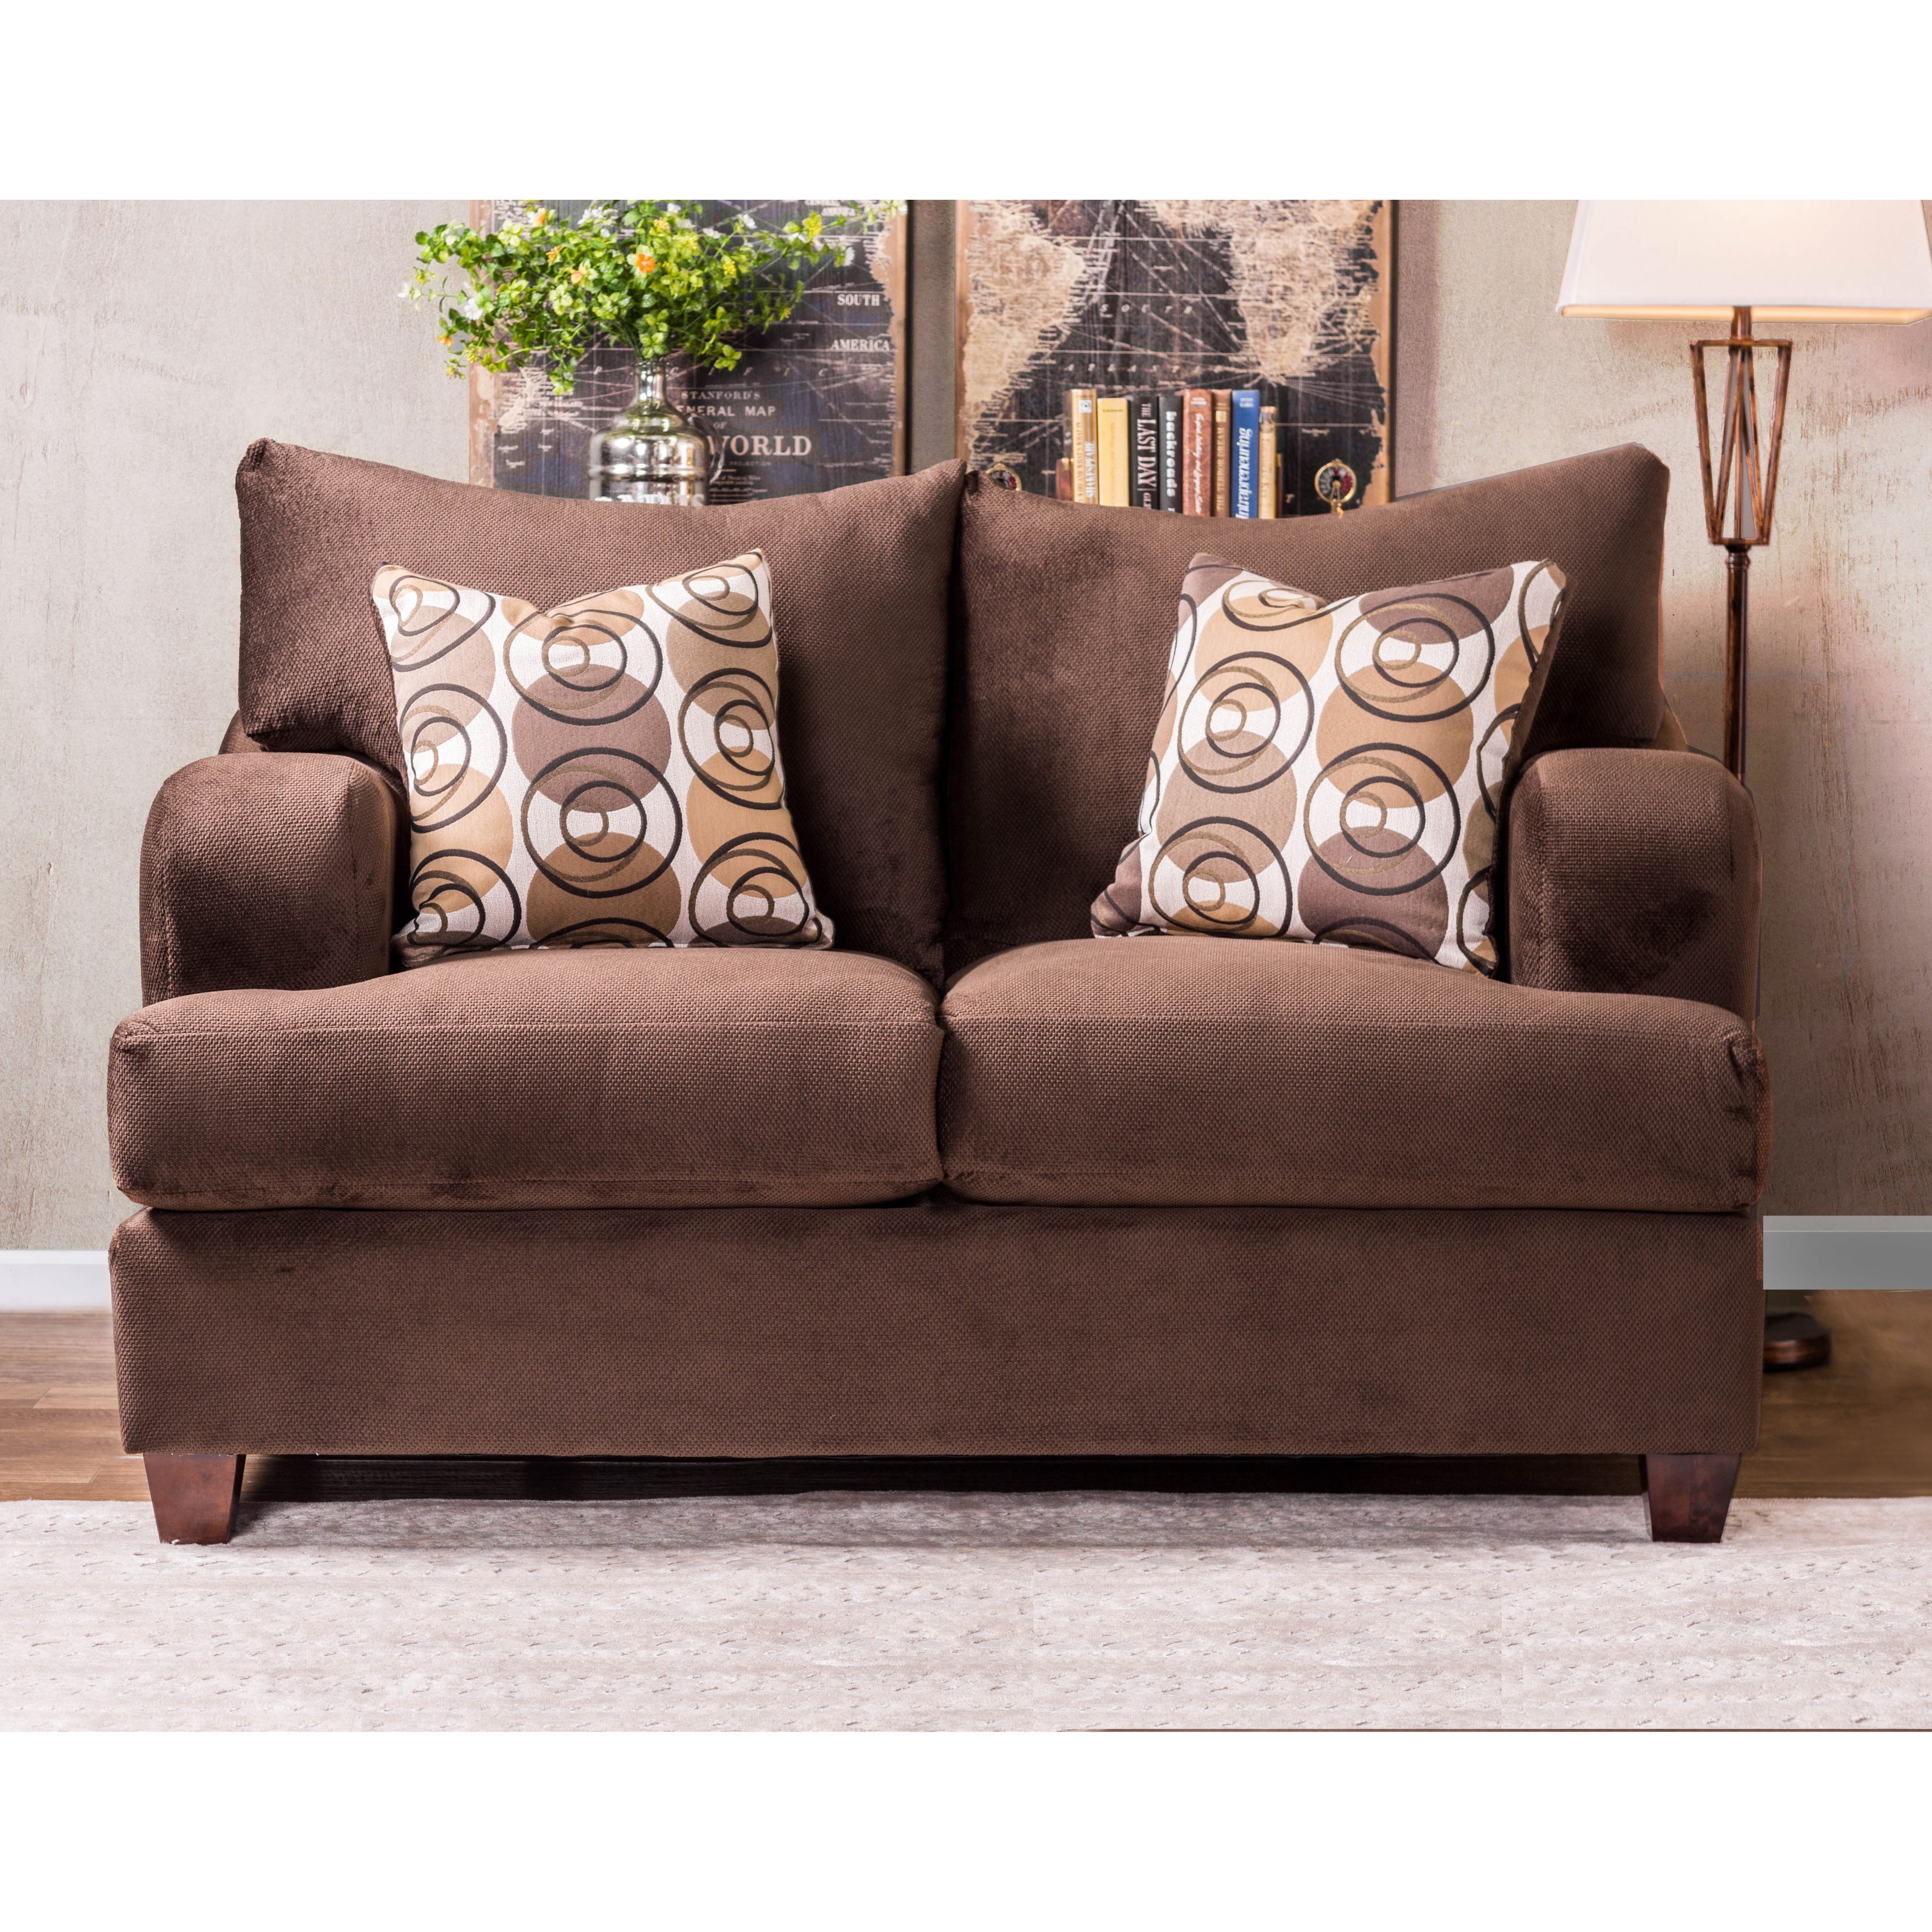 Furniture of America Tally Wood 3-Piece Plaid Sofa Set in Brown 